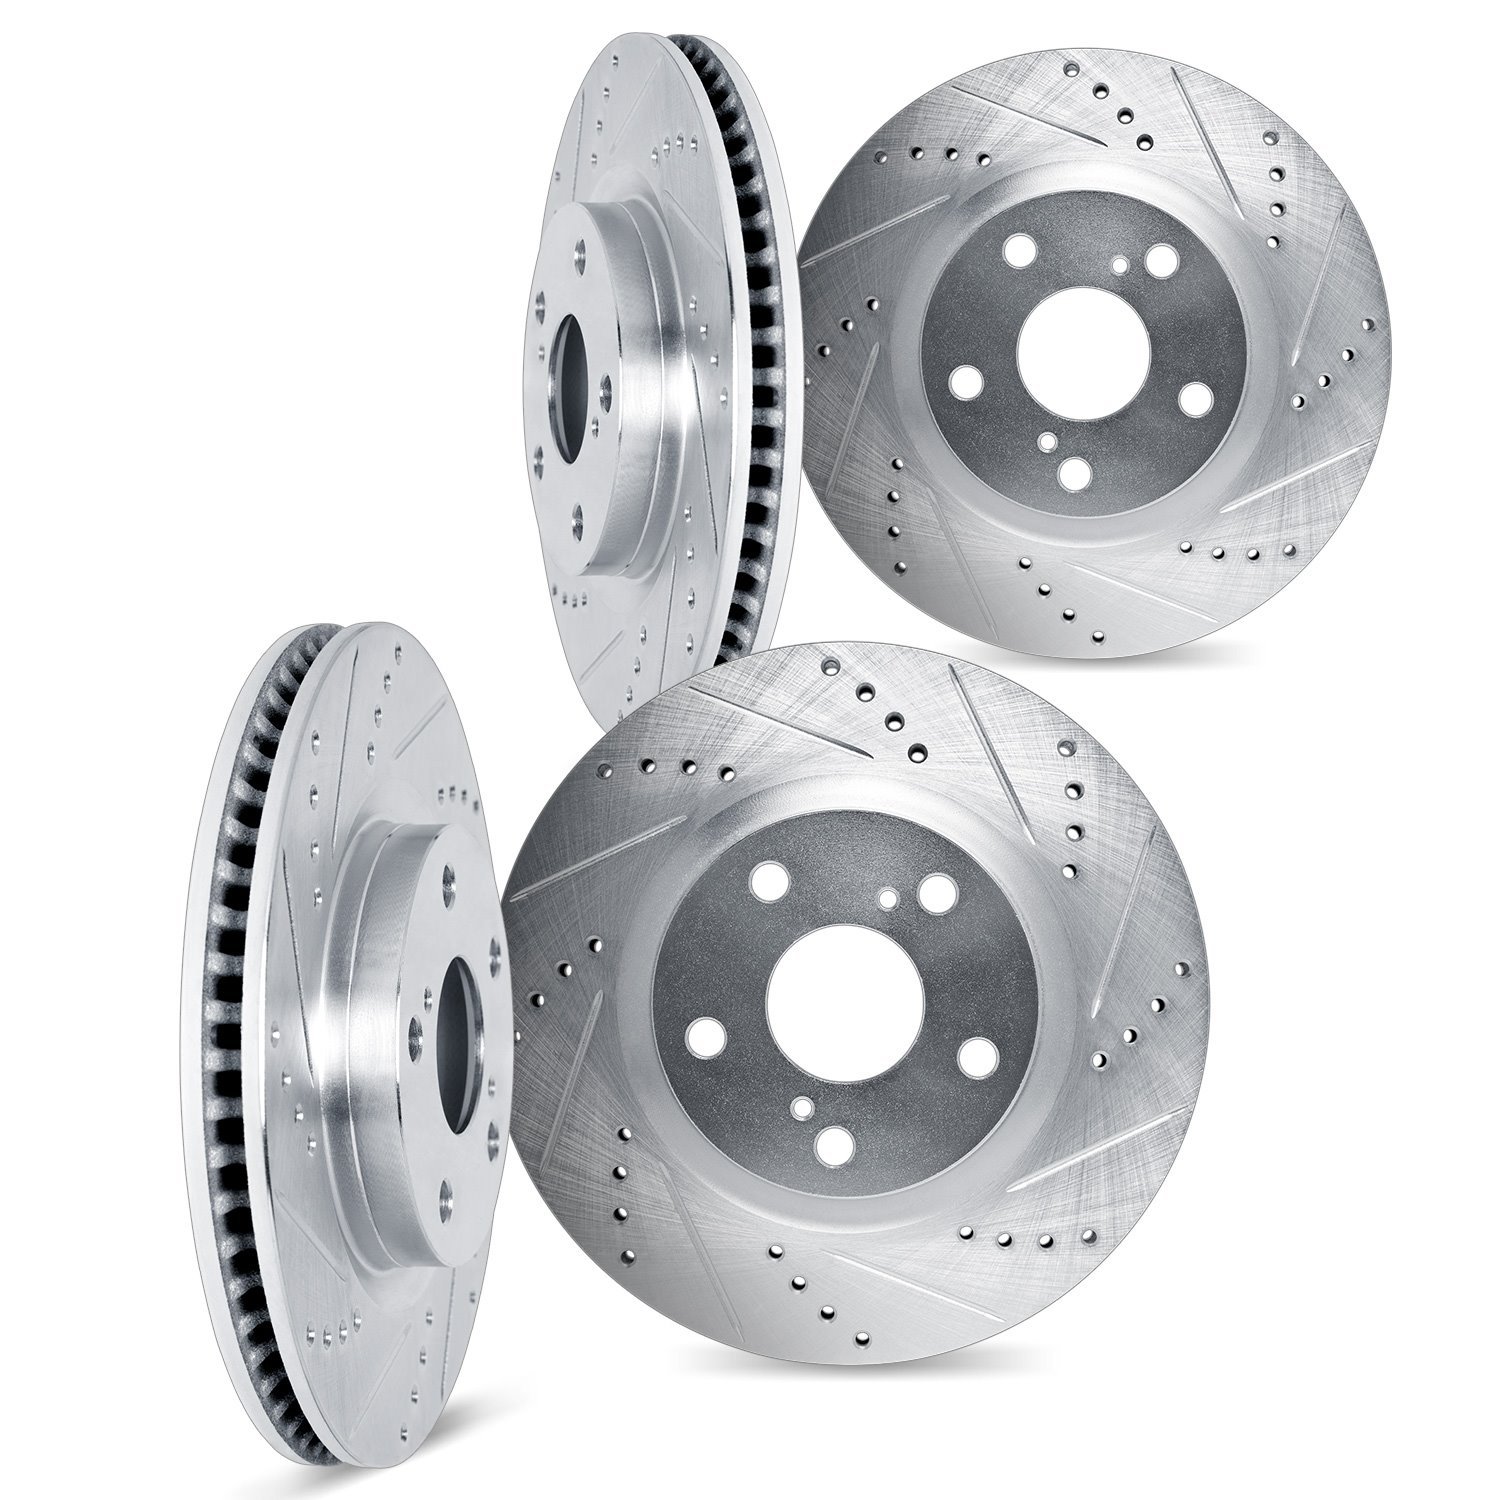 7004-20007 Drilled/Slotted Brake Rotors [Silver], 2003-2005 Jaguar, Position: Front and Rear